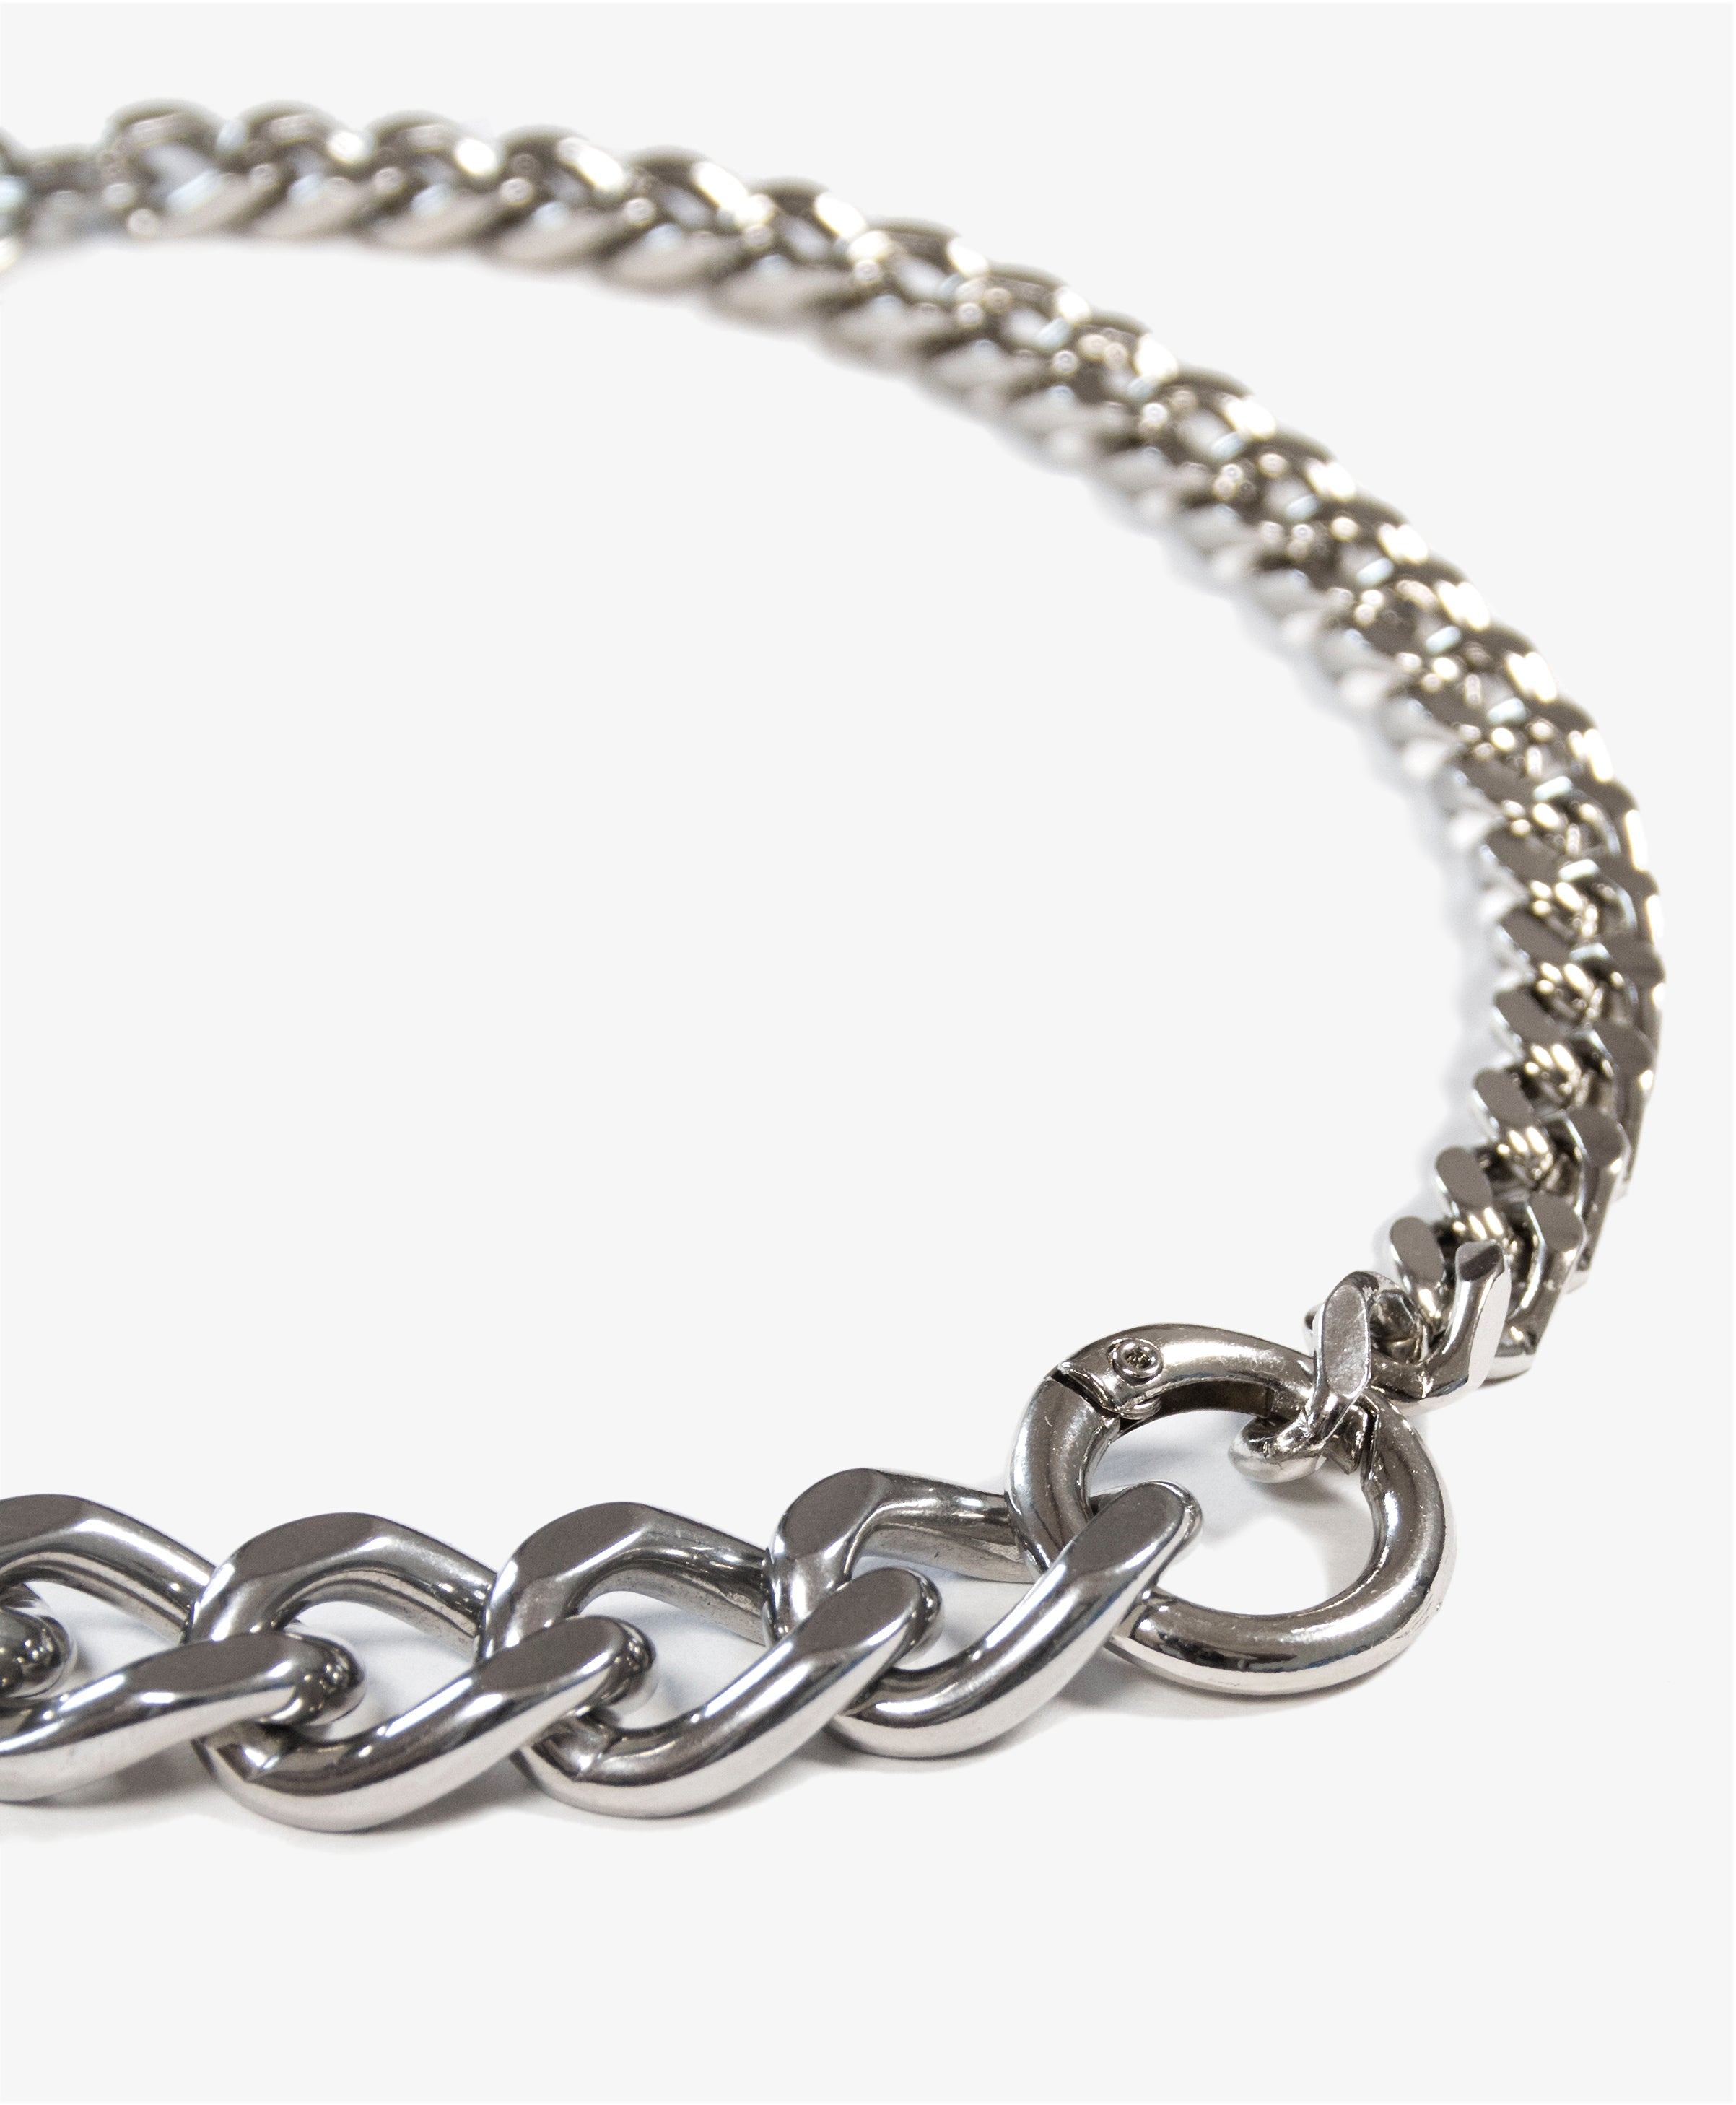 llayers-mens-women-jewelry-silver-stainlesssteel-choker-chain-necklace-unchained-010-Brooklyn-New-York-F1